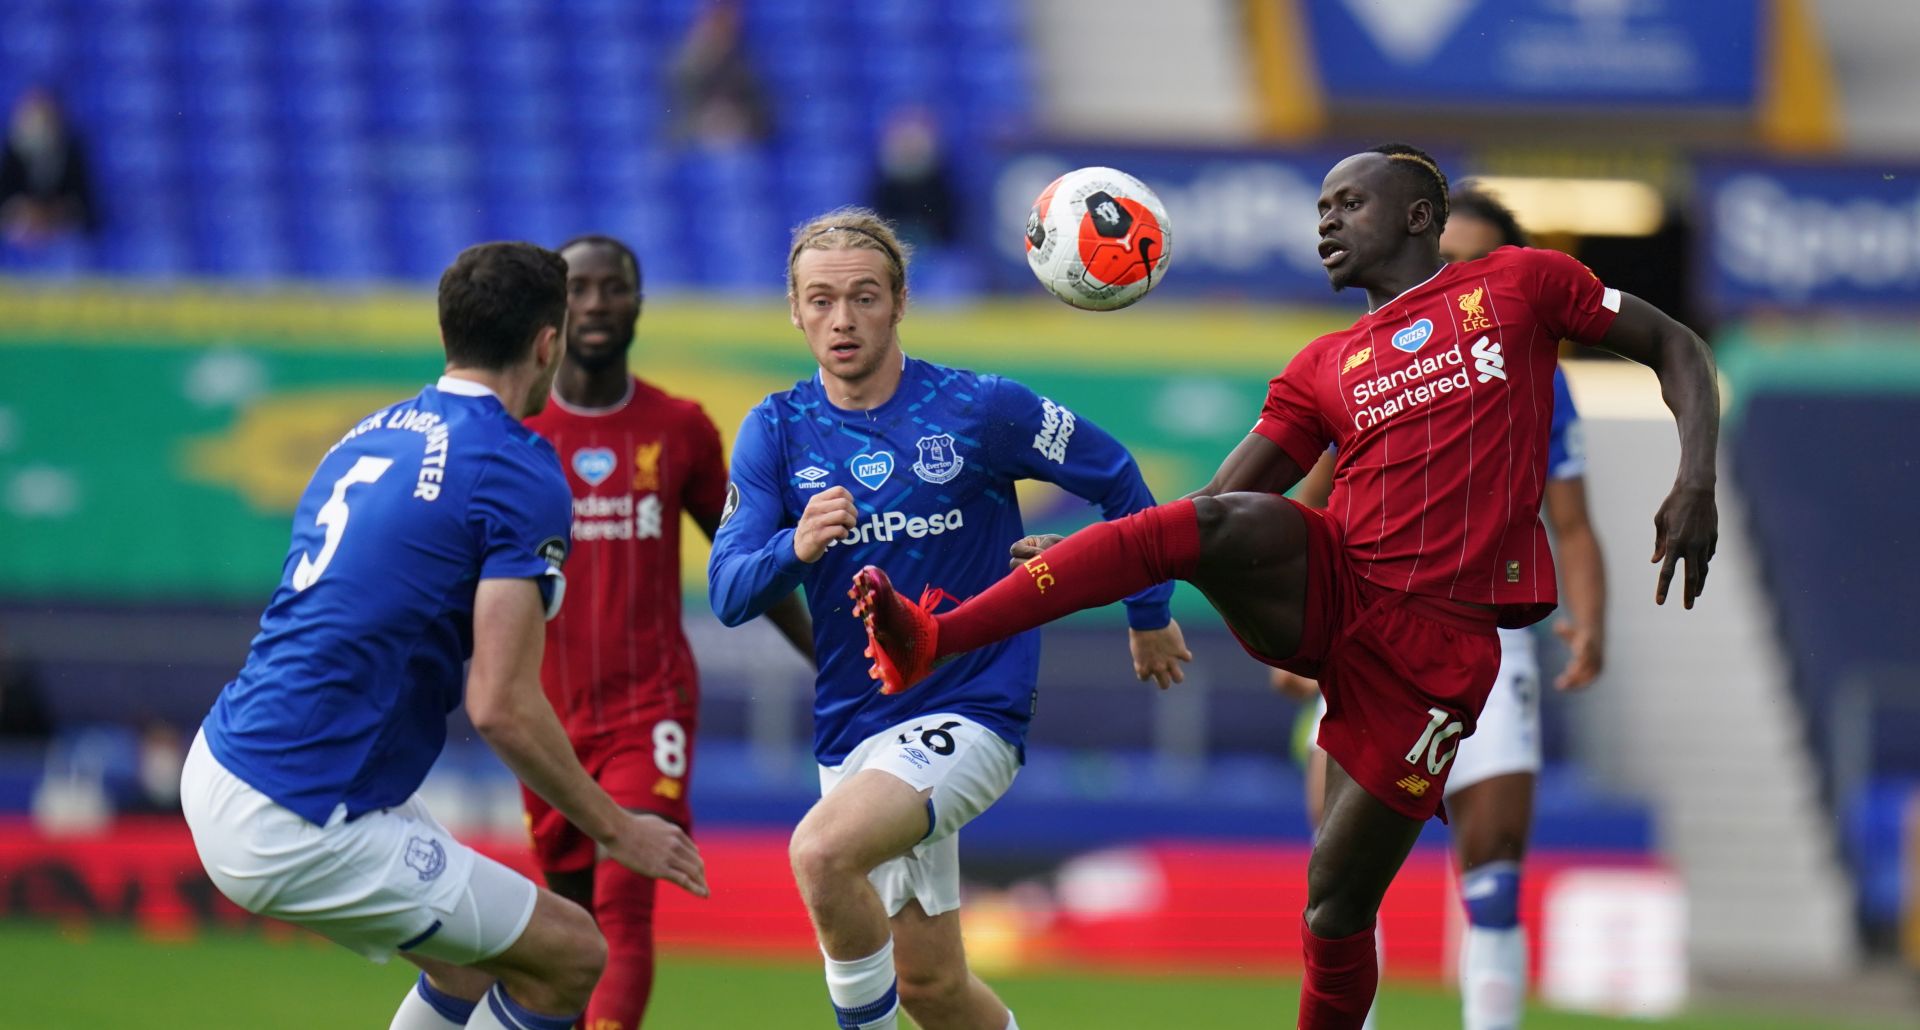 epa08500966 Liverpool's Sadio Mane (R) wins the ball during the English Premier League soccer match between Everton FC and Liverpool FC in Liverpool, Britain, 21 June 2020.  EPA/JON SUPER/ NMC / AP POOL EDITORIAL USE ONLY. No use with unauthorized audio, video, data, fixture lists, club/league logos or 'live' services. Online in-match use limited to 120 images, no video emulation. No use in betting, games or single club/league/player publications.